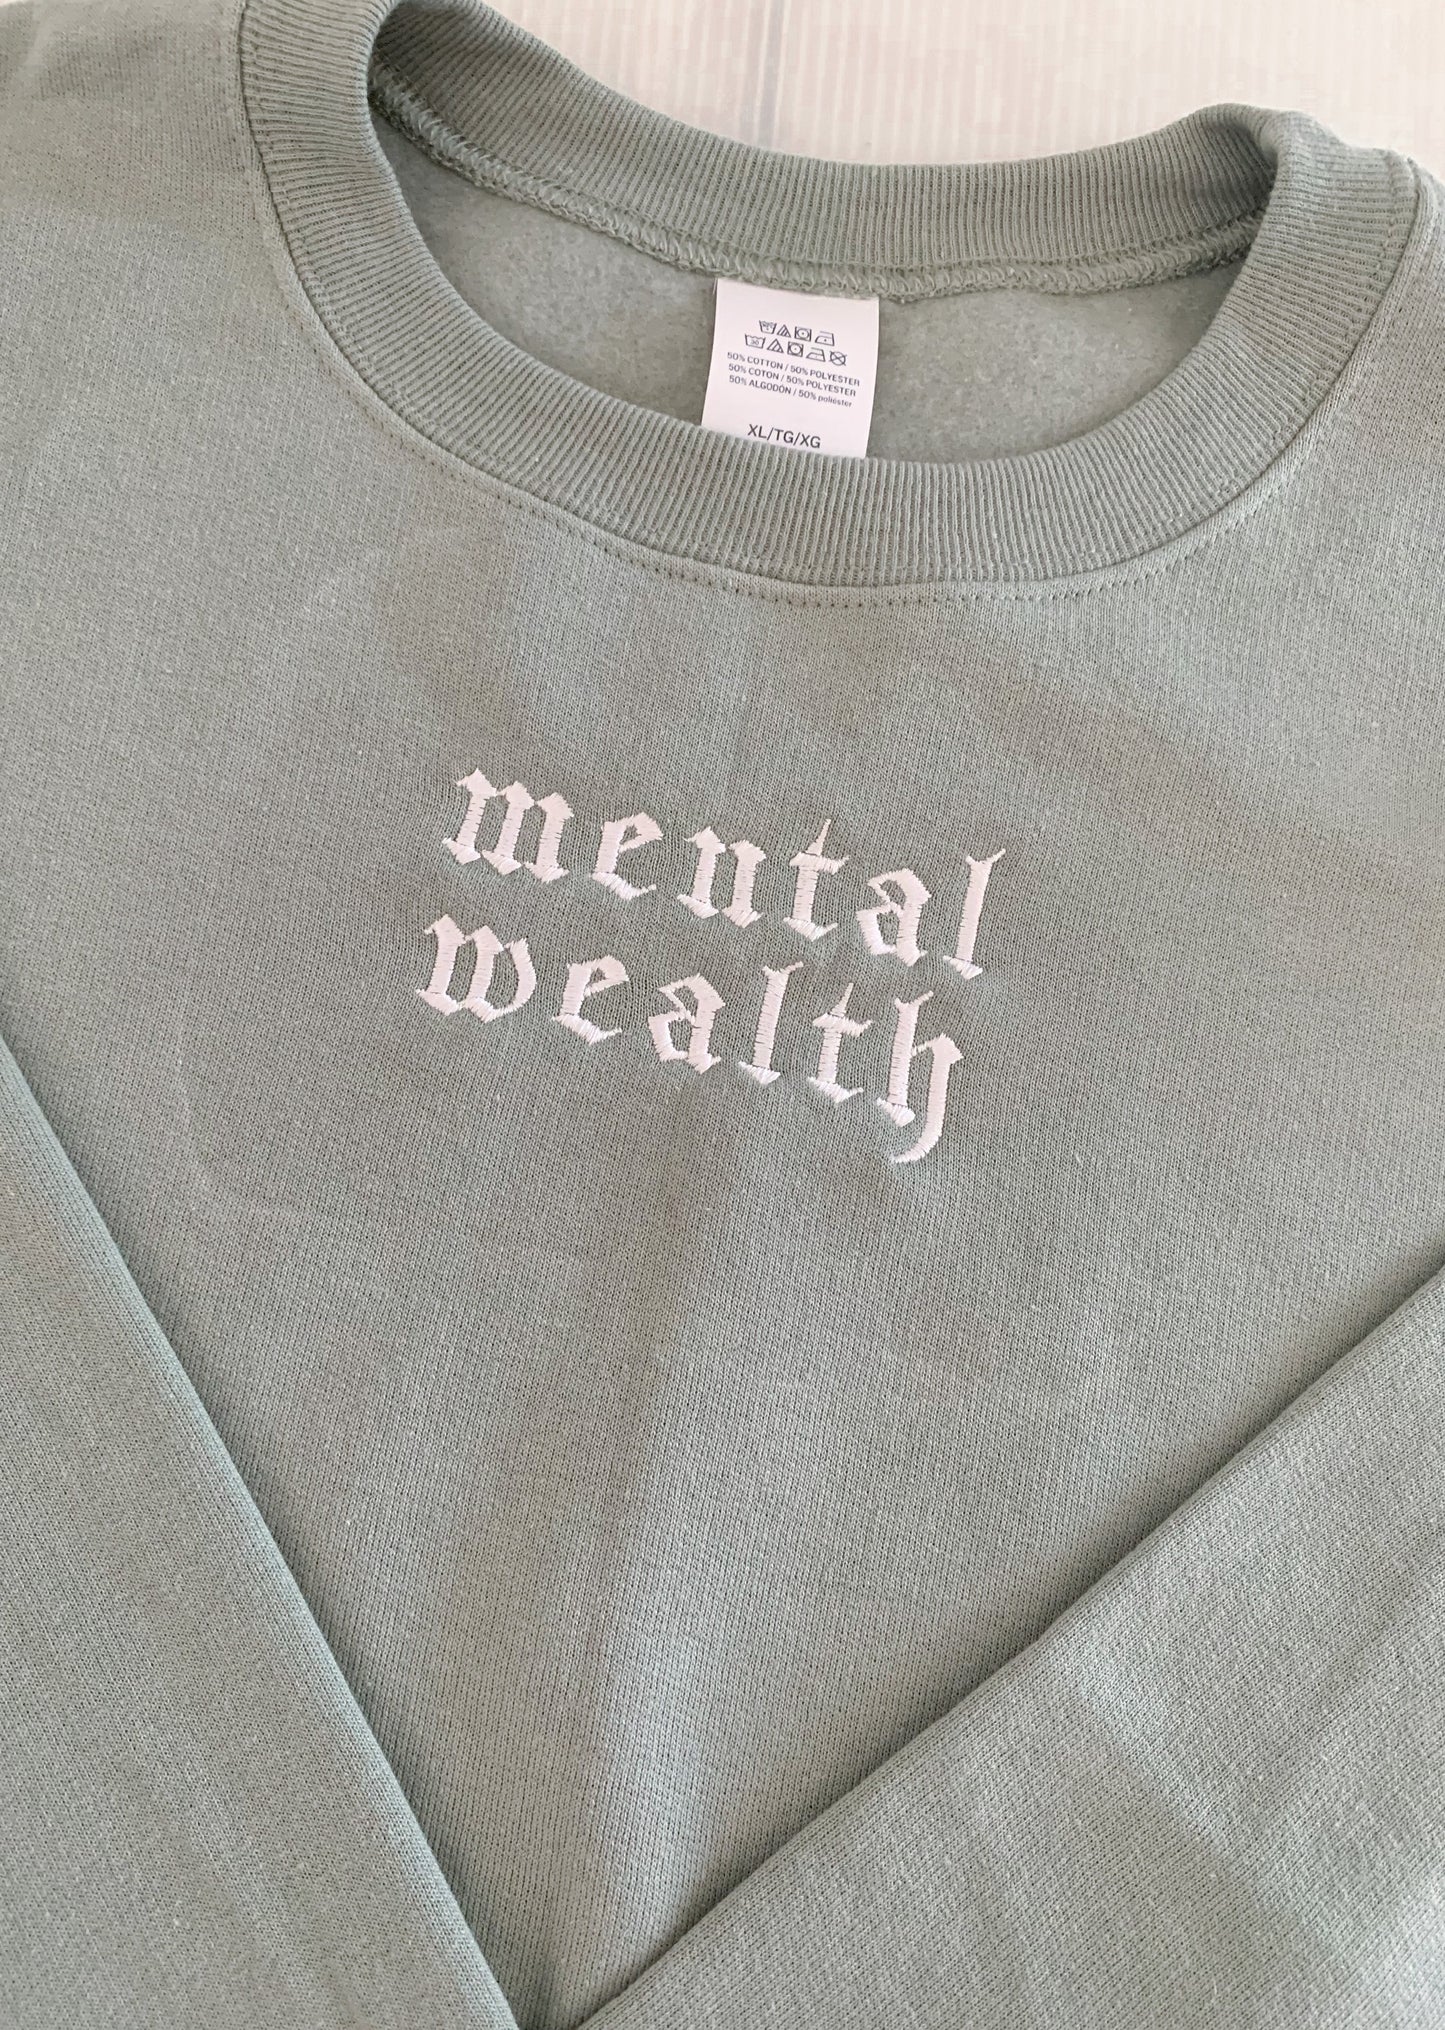 Mental Wealth Embroidery